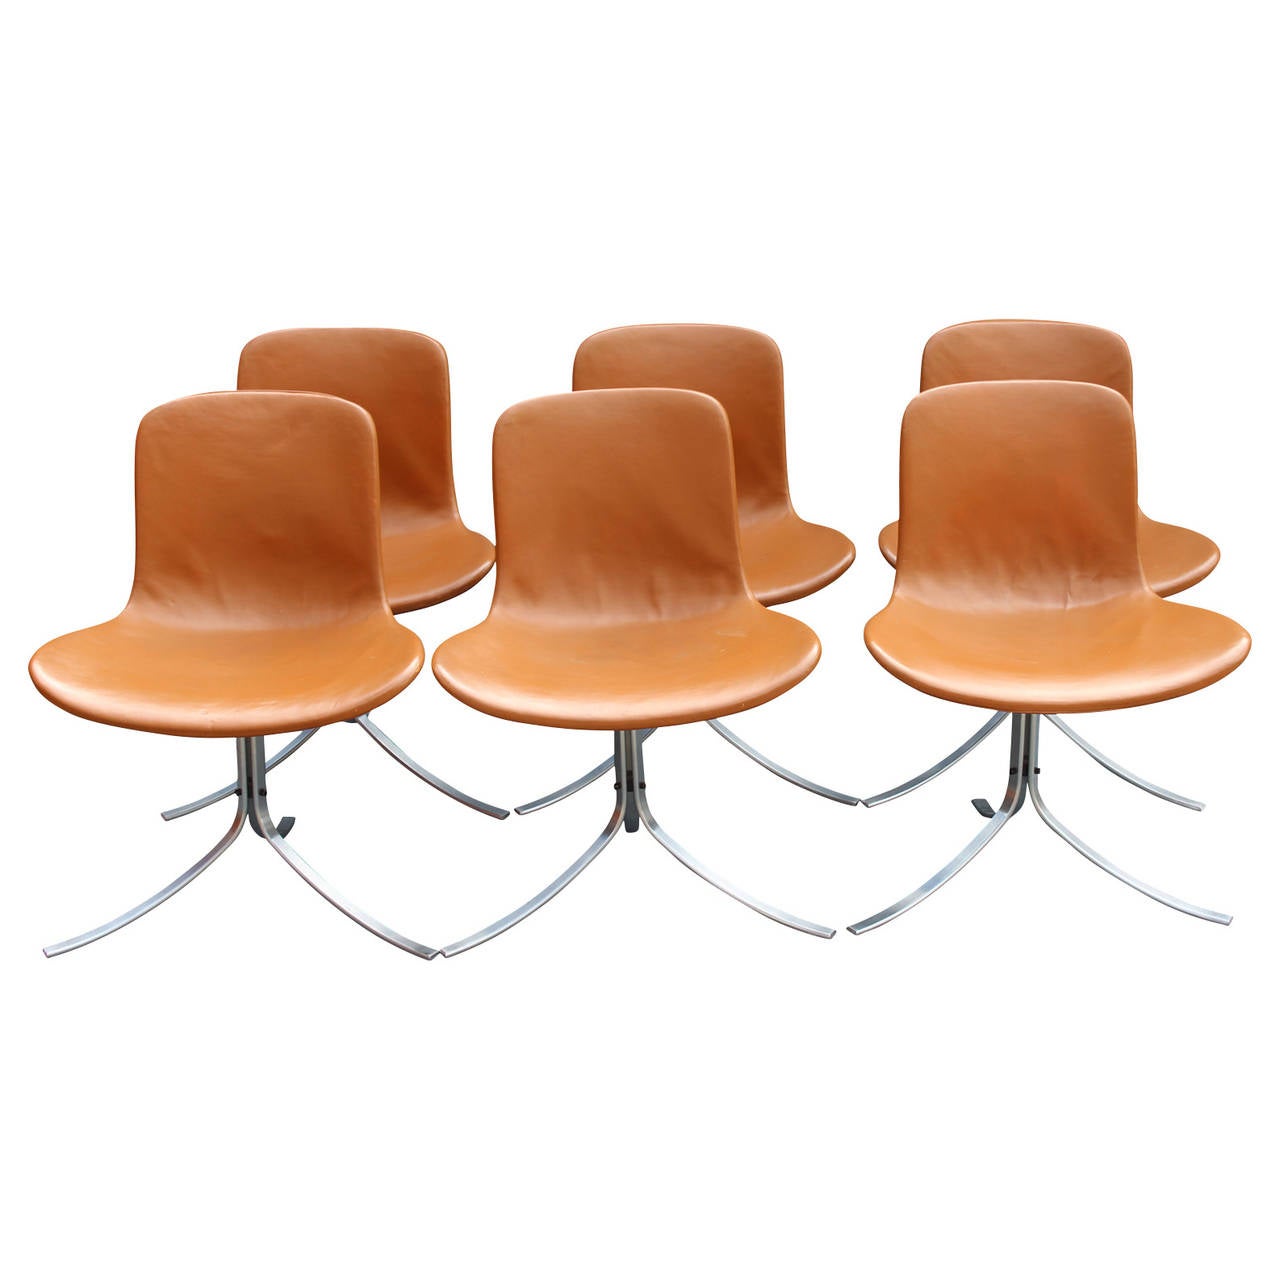 6 Chair´s Designed By Poul Kjærholm model PK9. The chairs are manufactured By Fritz Hansen 1981. The chair is known as the 